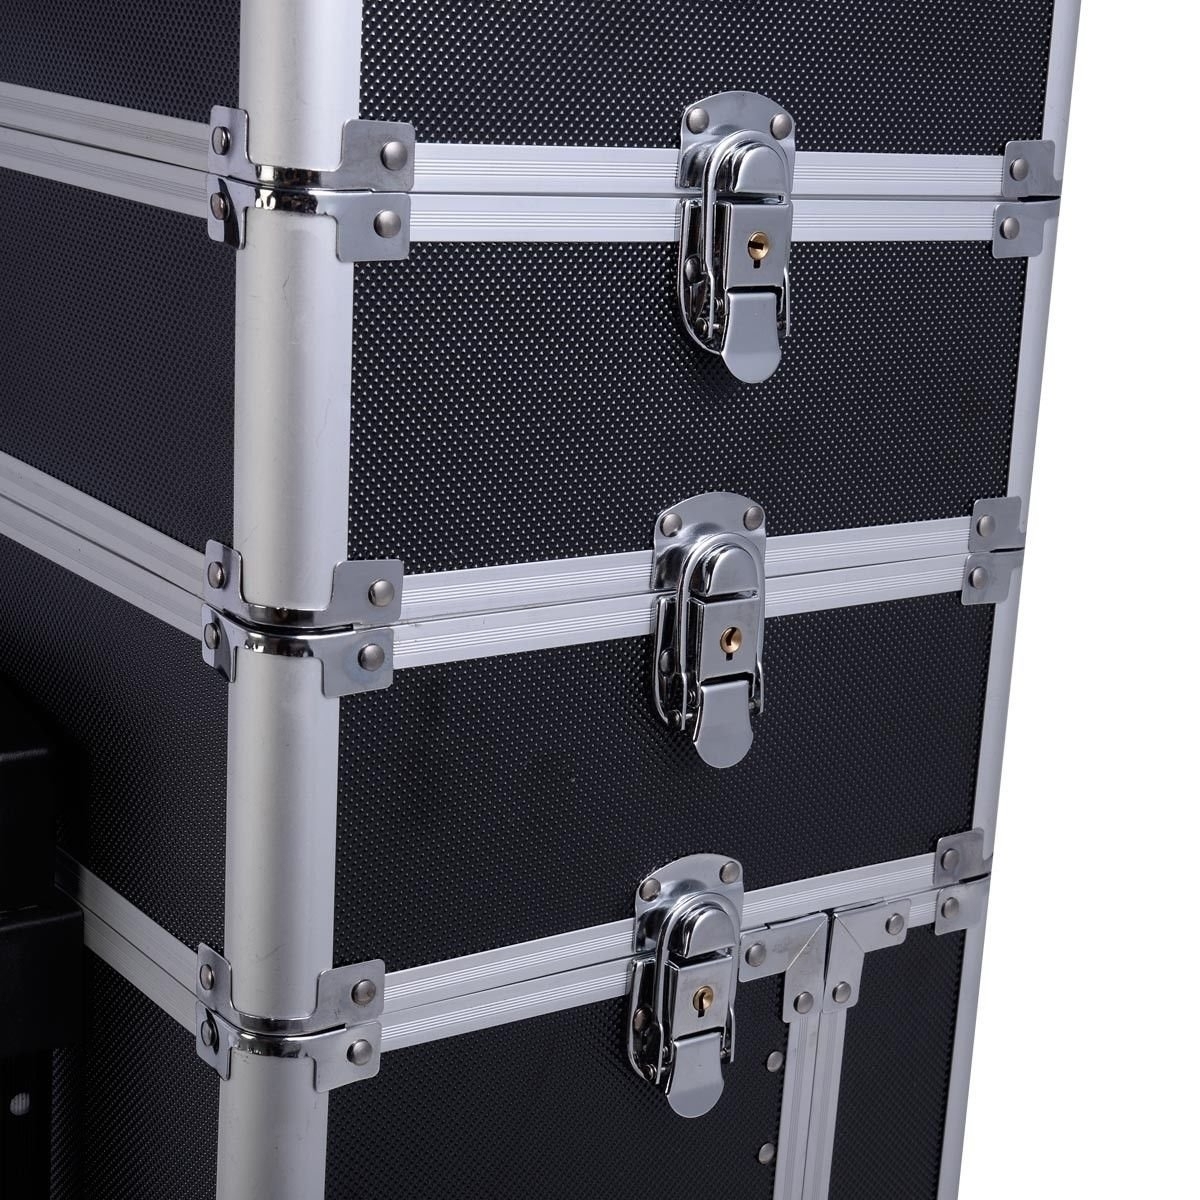 Gymax 4in1 Interchangeable Pro Aluminum Rolling Makeup Case Cosmetic Train Box Trolley (Black Diamond)